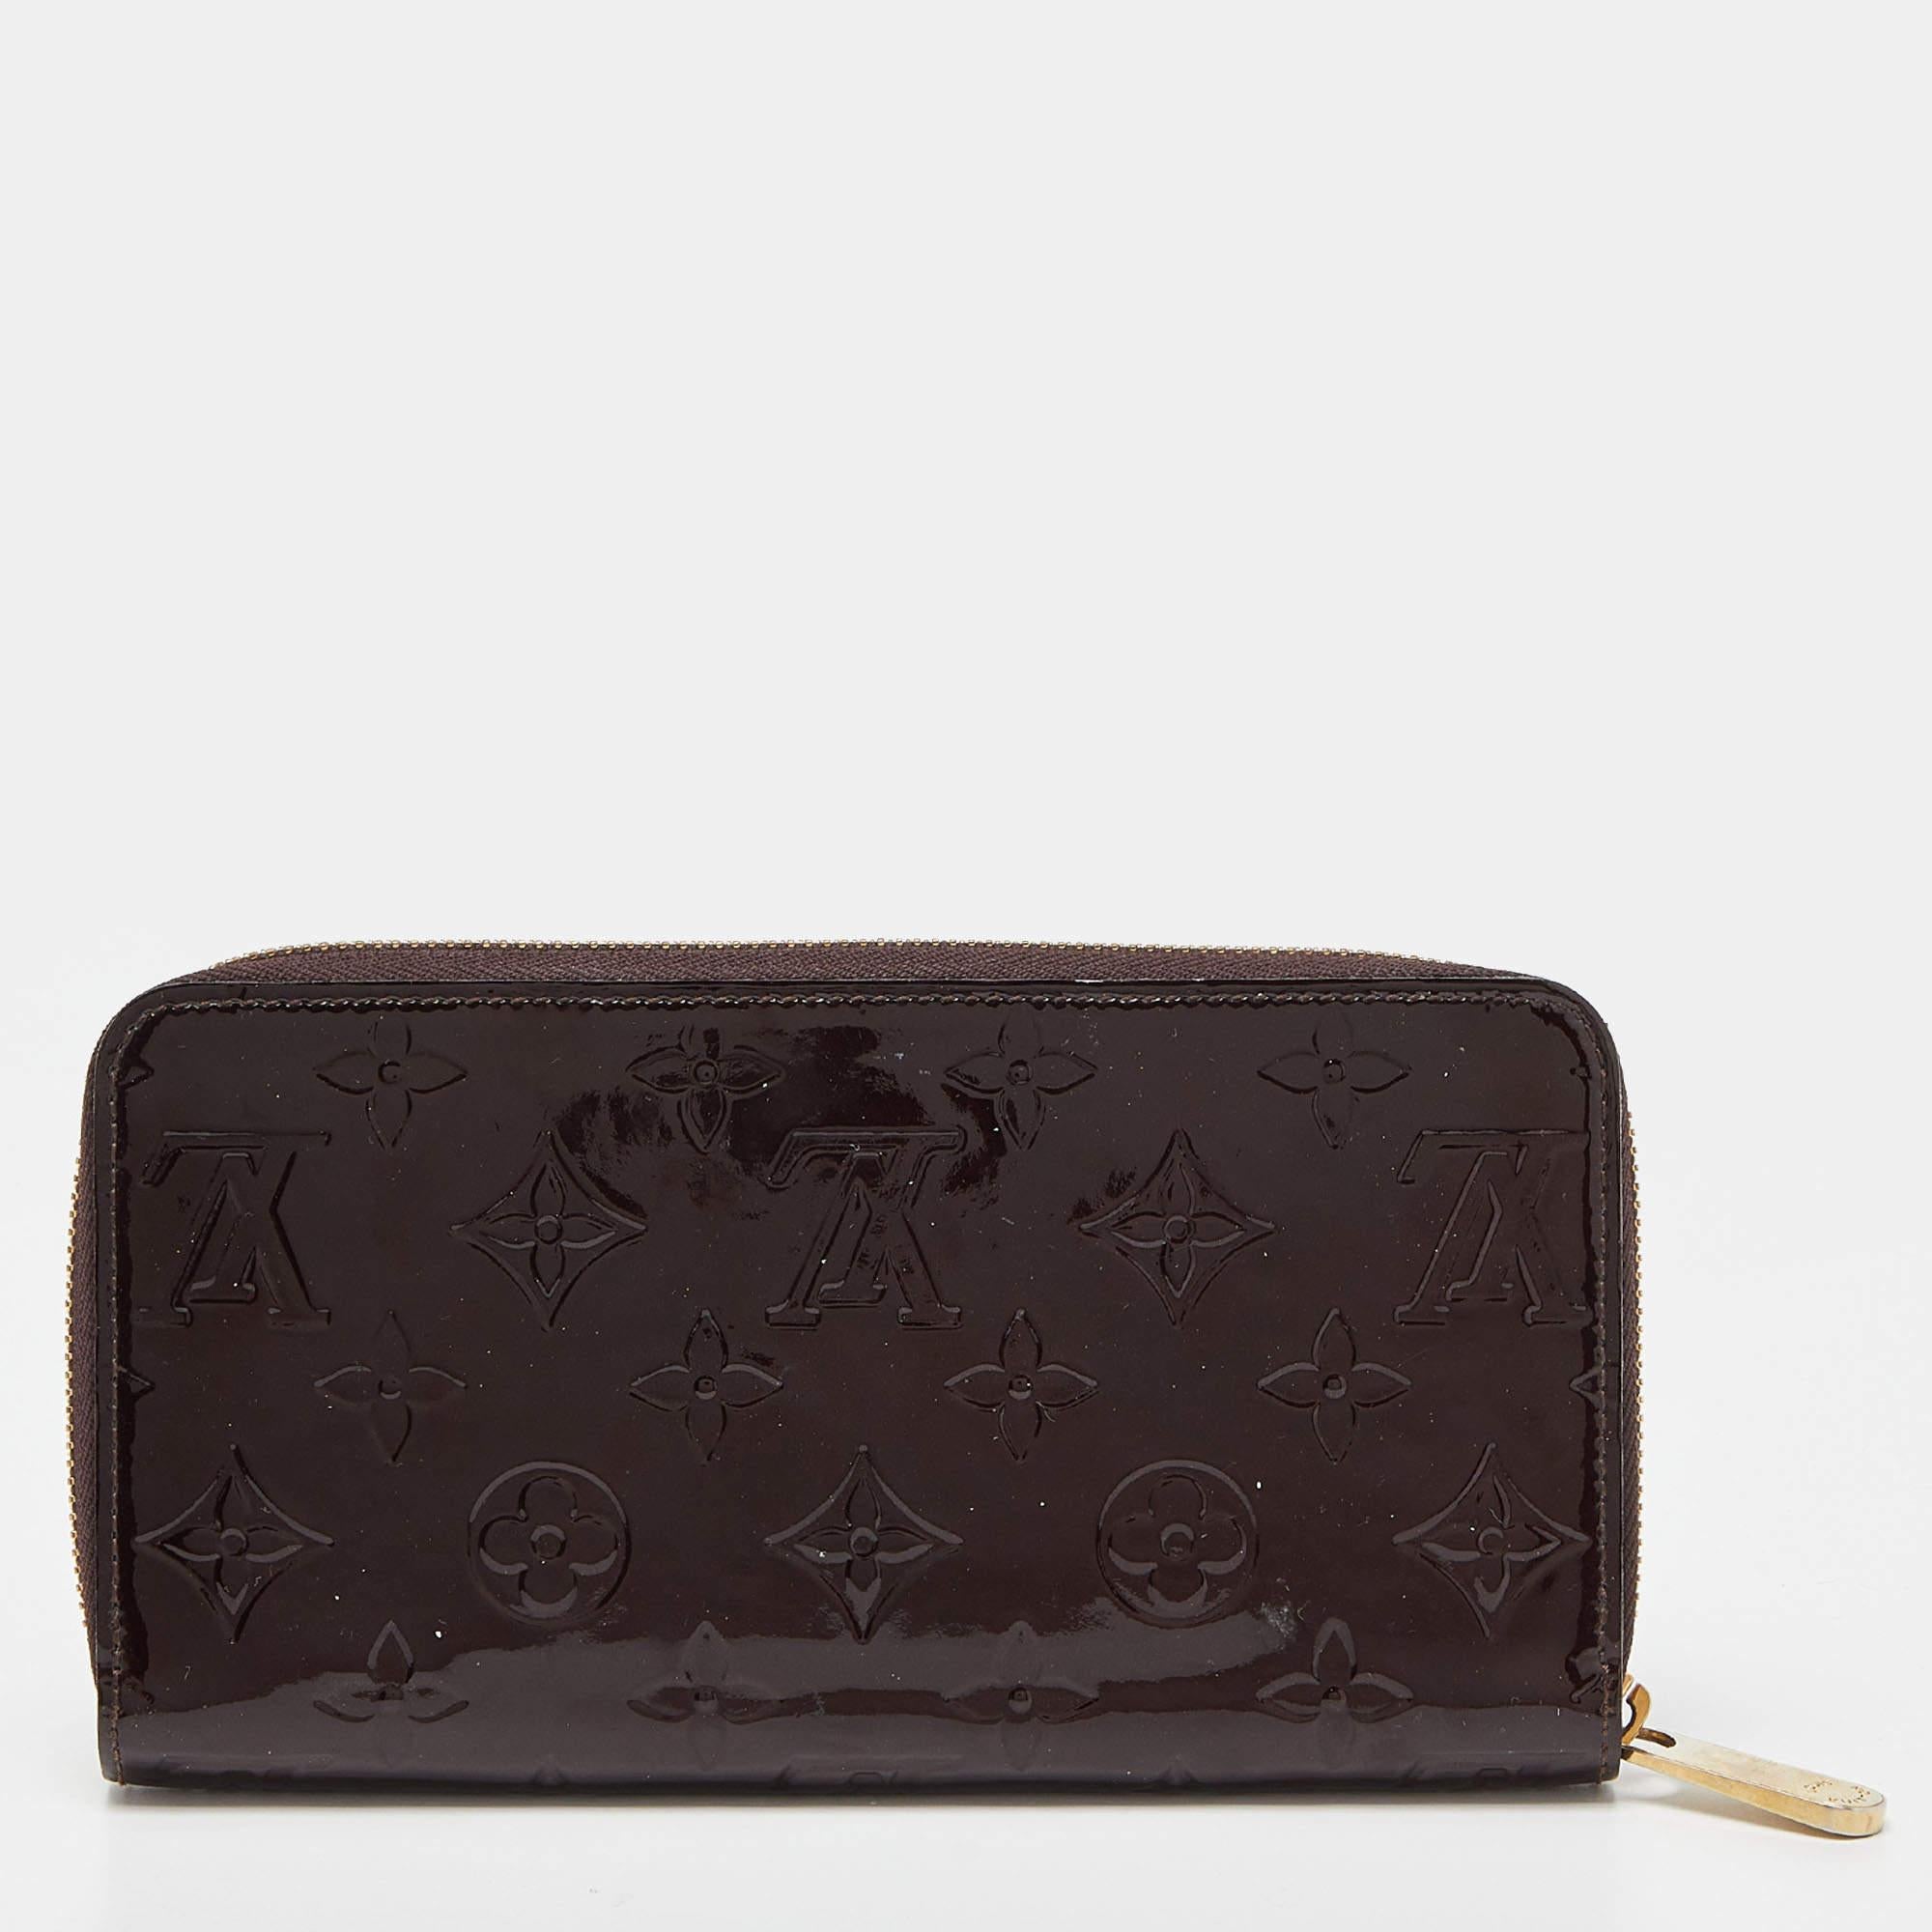 This Louis Vuitton Zippy wallet is conveniently designed for everyday use. Crafted from Amarante Monogram Vernis, the wallet has a wide zip closure that opens to reveal multiple slots, lined compartments, and a zip pocket for you to arrange your